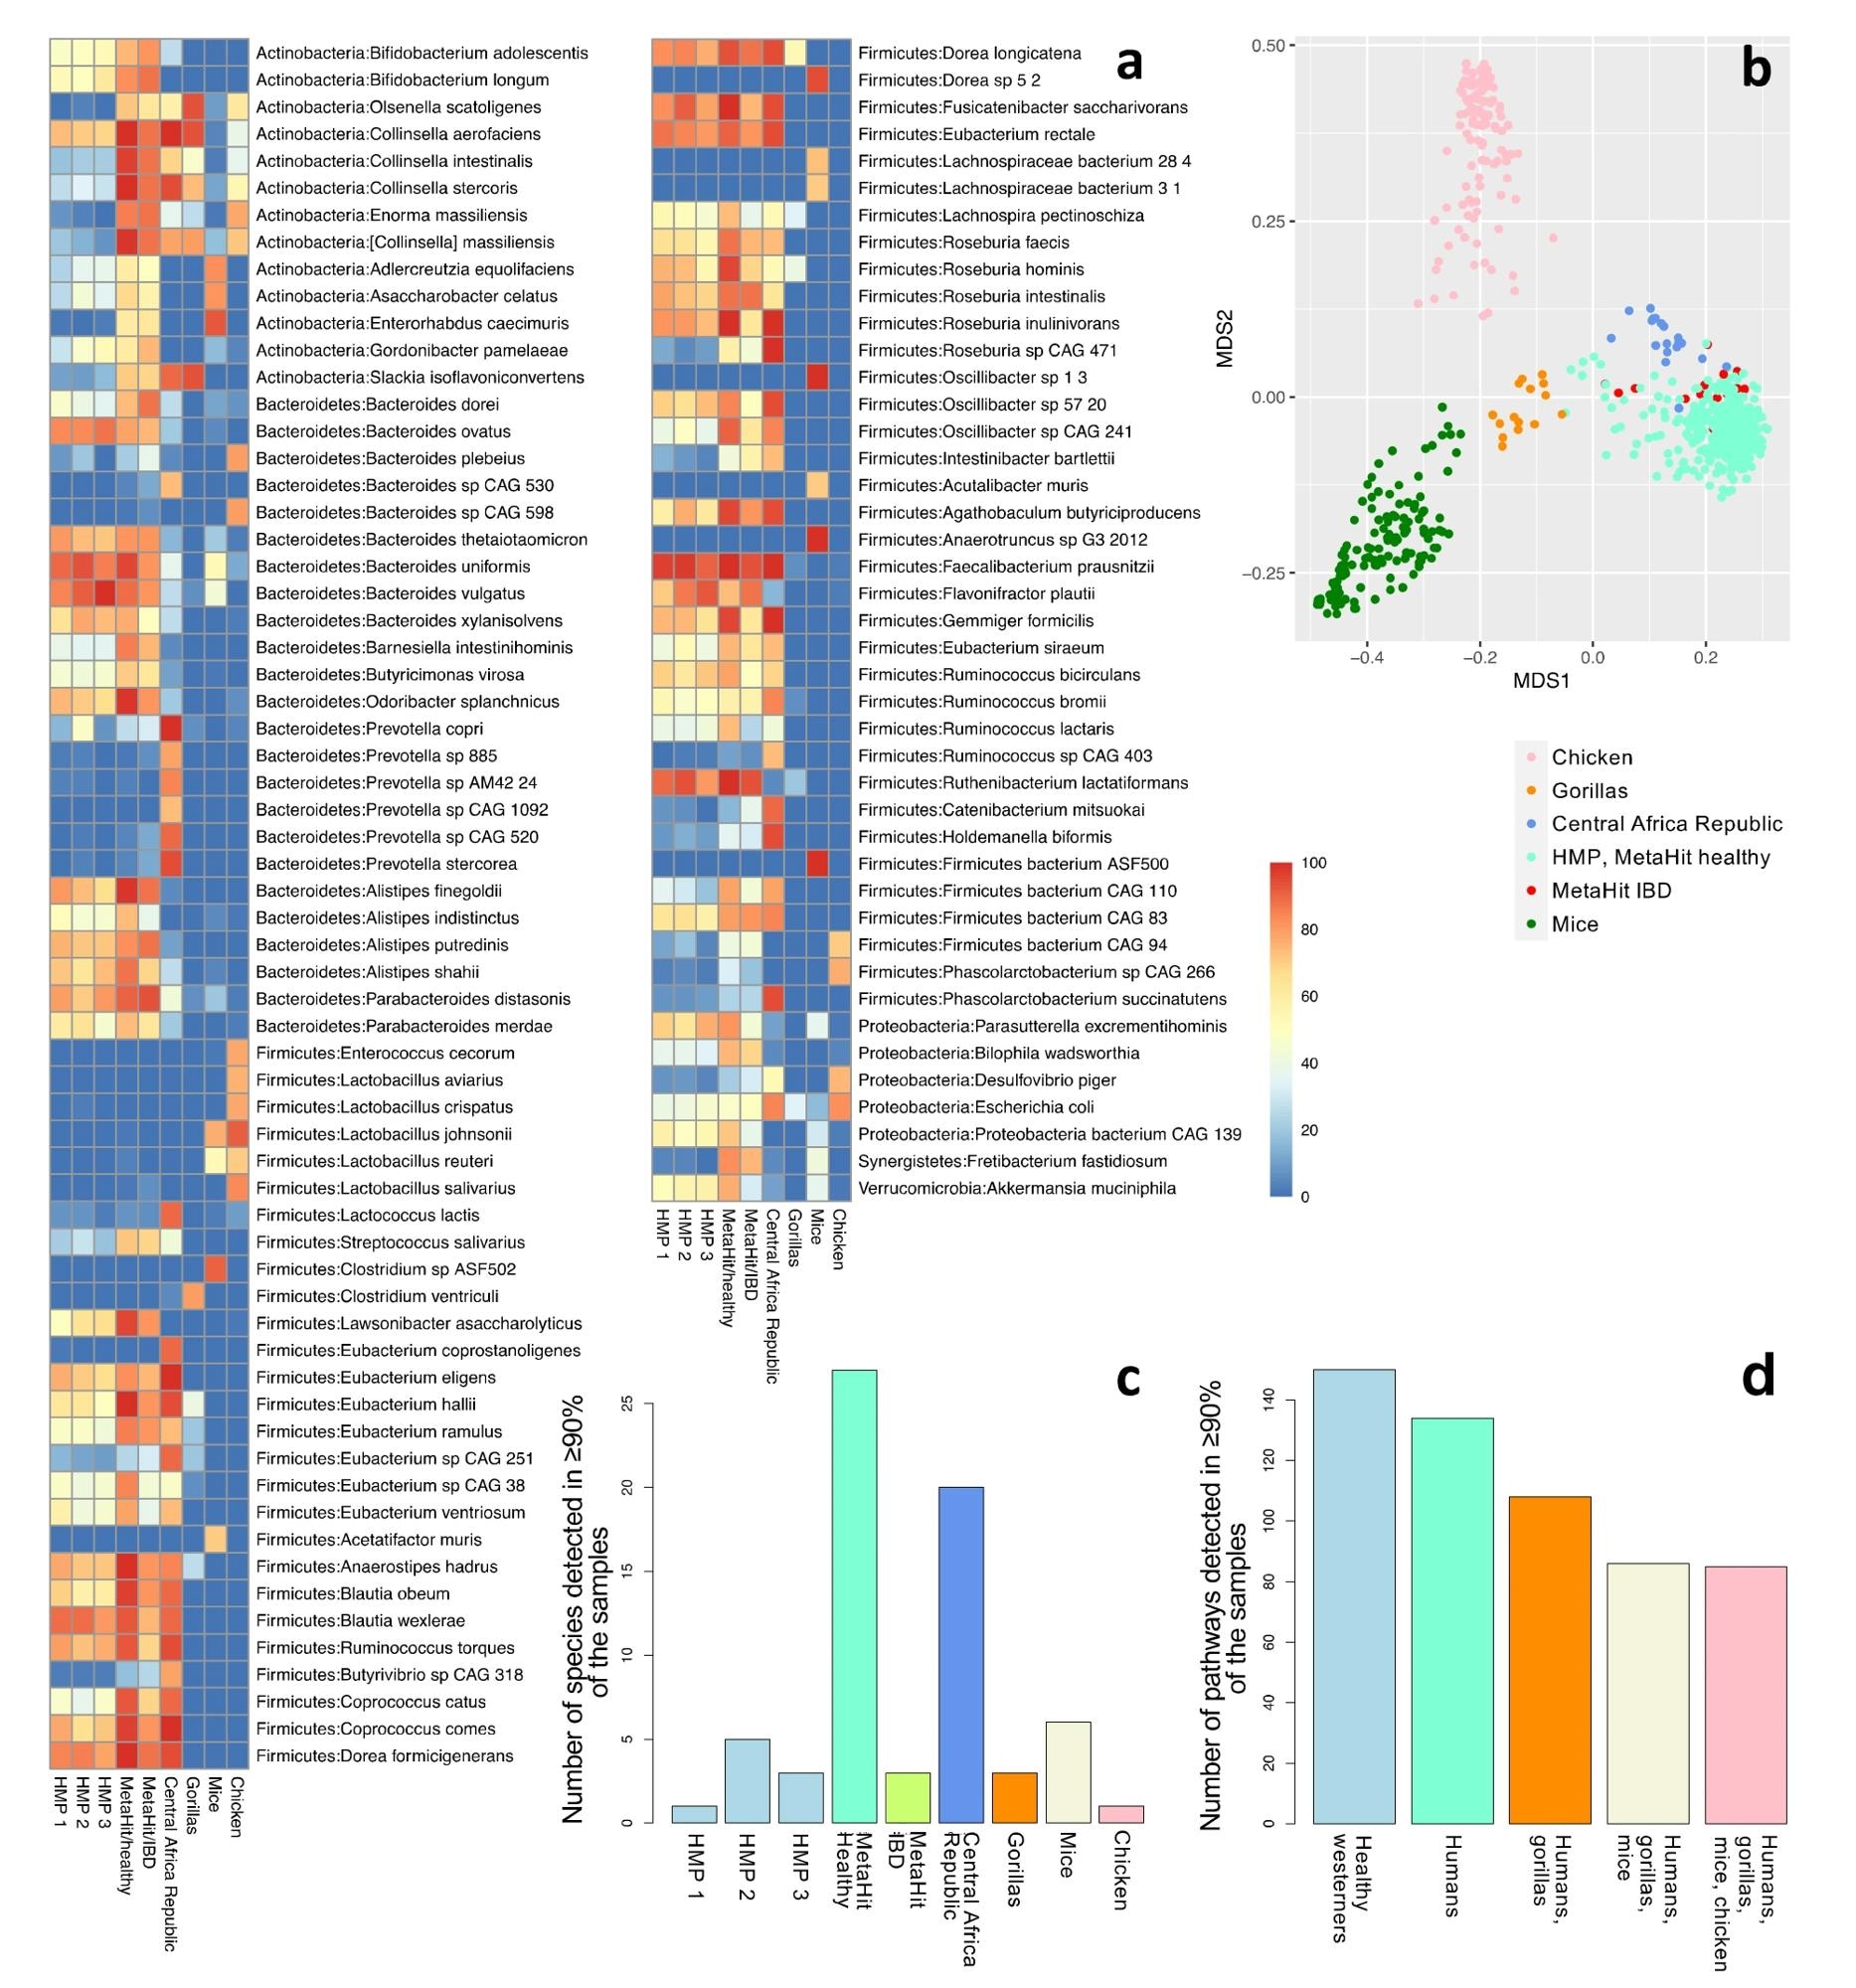 Community profiling of nine cohorts: HMP phases 1 (n = 138), 2 (n = 91), and 3 (n = 42); healthy individuals from Denmark (n = 64); individuals with IBD from Spain (n = 16); hunter-gatherers and traditional agriculturalists (n = 19); gorillas (n = 15); mice (n = 141); and chickens (n = 121). (a) The fraction of samples that contain each species, for species detected in at least 70% of the samples in at least one cohort (a total of 107 species). Refer to Supplementary Table S3 for a complete list of all the detected species in all cohorts. (b) The first two components of an unweighted UniFrac-based MDS analysis considering all samples. (c) The number of species detected in at least 90% of the samples of each cohort. Only one species (F. prausnitzii) was detected in 90% or more of the samples across all healthy human Western (n = 4) and all human (n = 6) datasets. (d) The number of pathways detected in >90% of the samples in all healthy Western human datasets (n = 4); all human datasets (n = 6); human and gorilla datasets (n = 7); human, gorilla, and mouse datasets (n = 8); and all datasets, including chickens (n = 9).